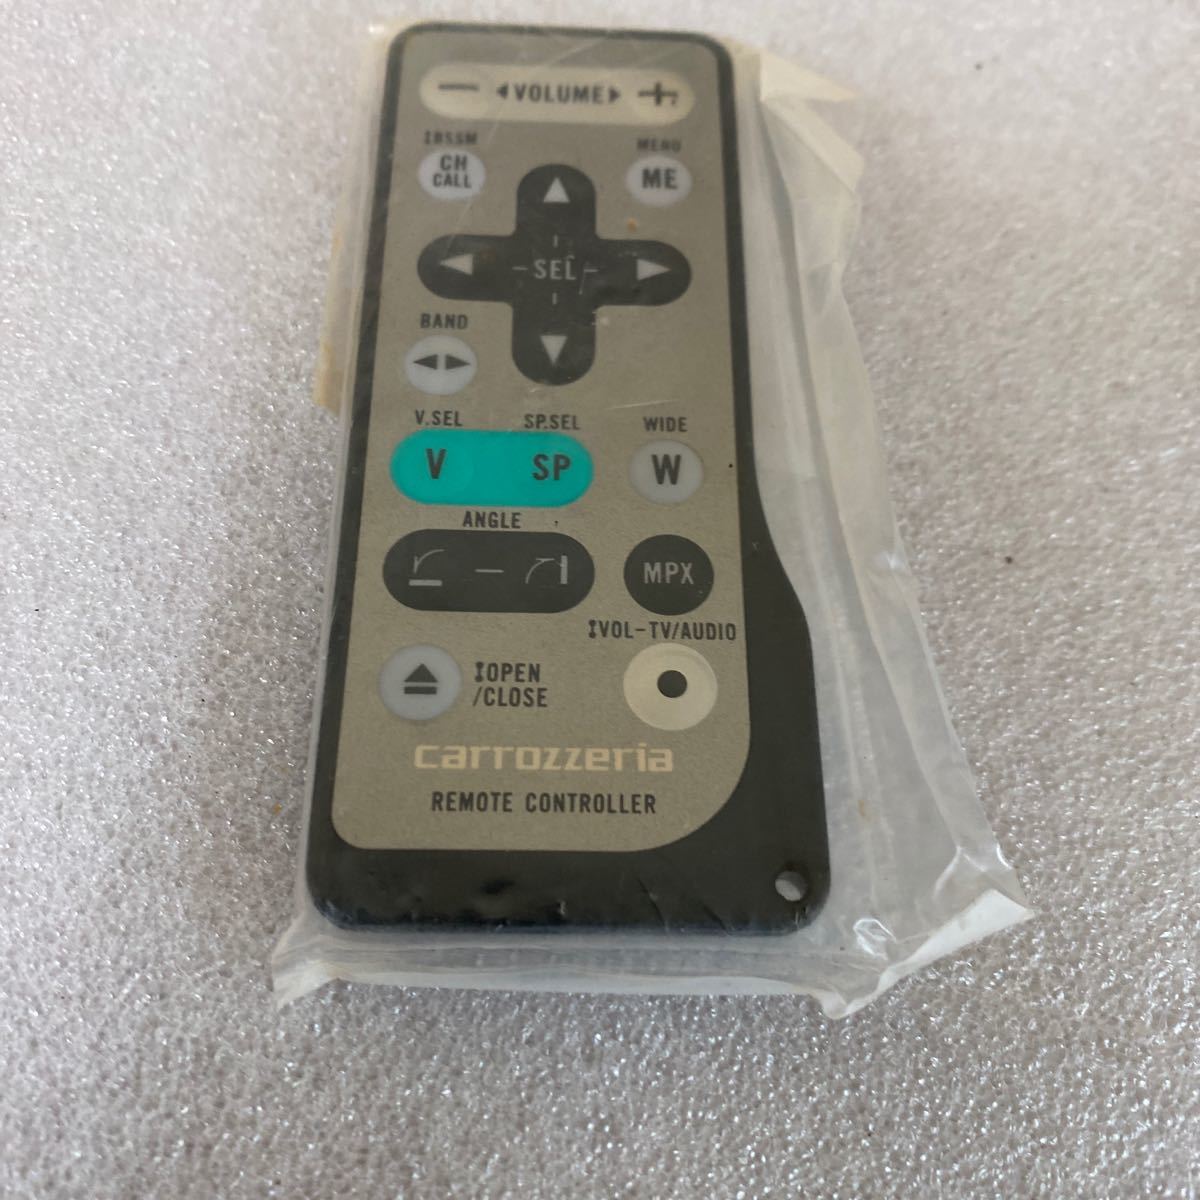  new goods unopened Carrozzeria audio remote control CXB2593 operation not yet verification Junk free shipping 